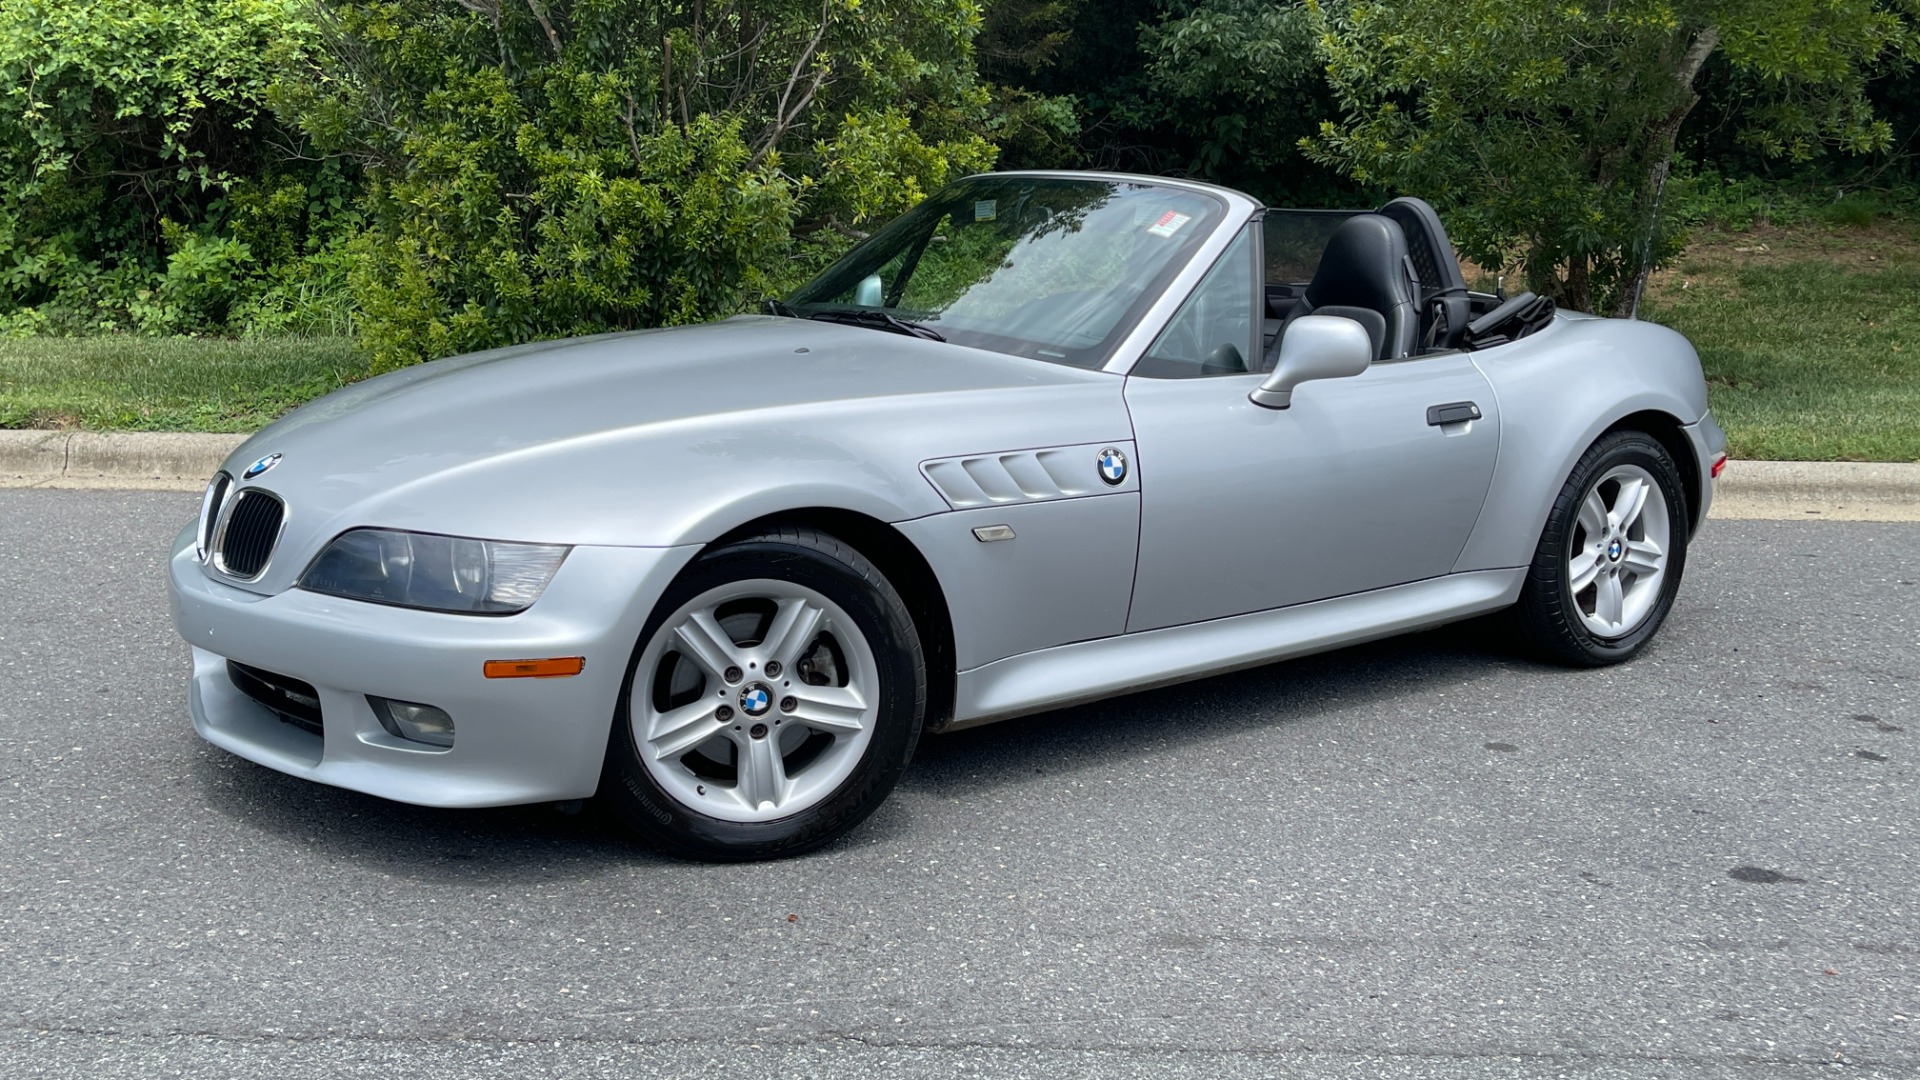 Used 2000 BMW Z3 2.5L / CONVERTIBLE / PWR TOP / AUTOMATIC / HEATED SEATS / LEATHER for sale $12,995 at Formula Imports in Charlotte NC 28227 2